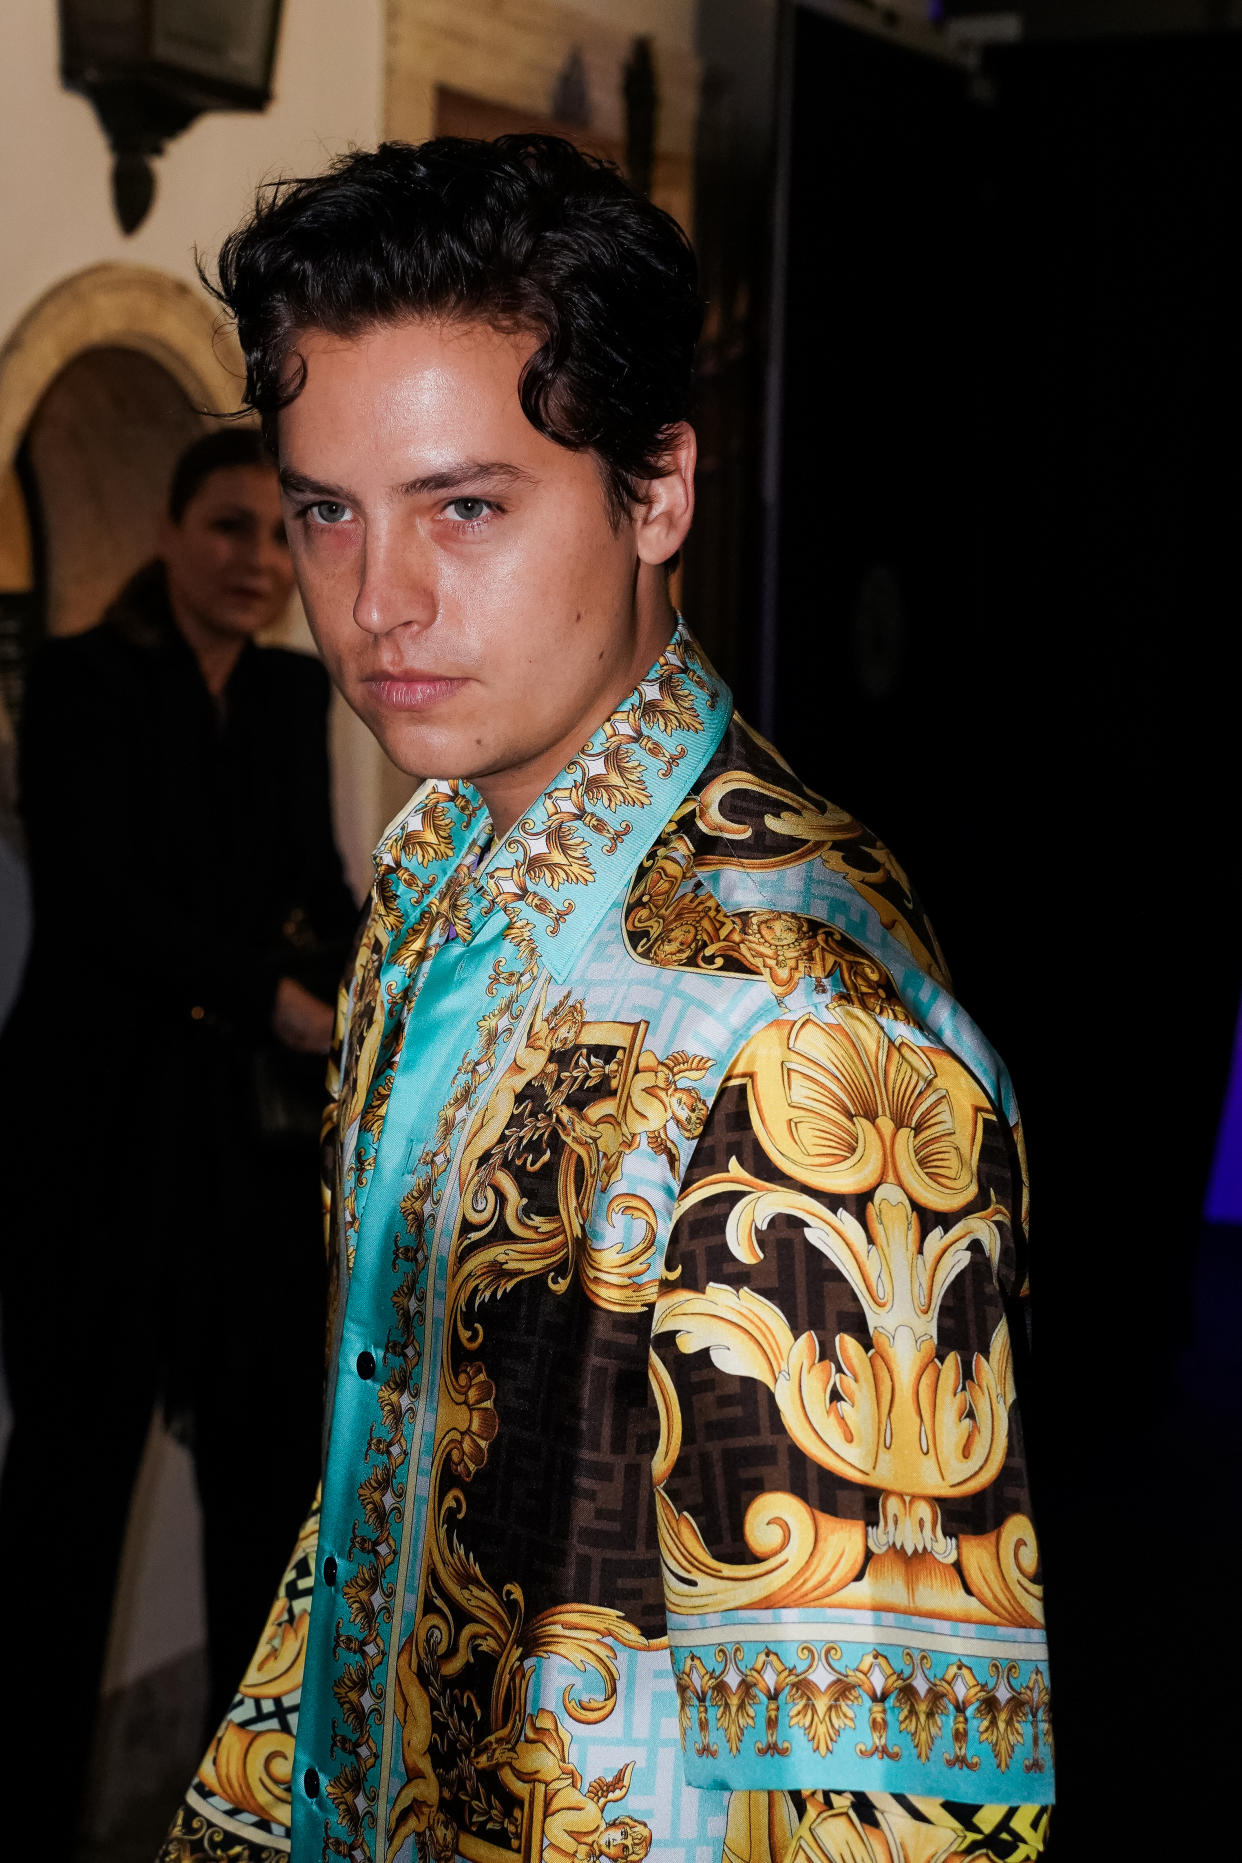 American actor Cole Sprouse guest at the party organized for the launch of the Fendace collection created by the collaboration between the fashion houses Fendi and Versace. Milan (Italy), September 26th, 2021 (Photo by Marco Piraccini/Mondadori Portfolio/Sipa USA)